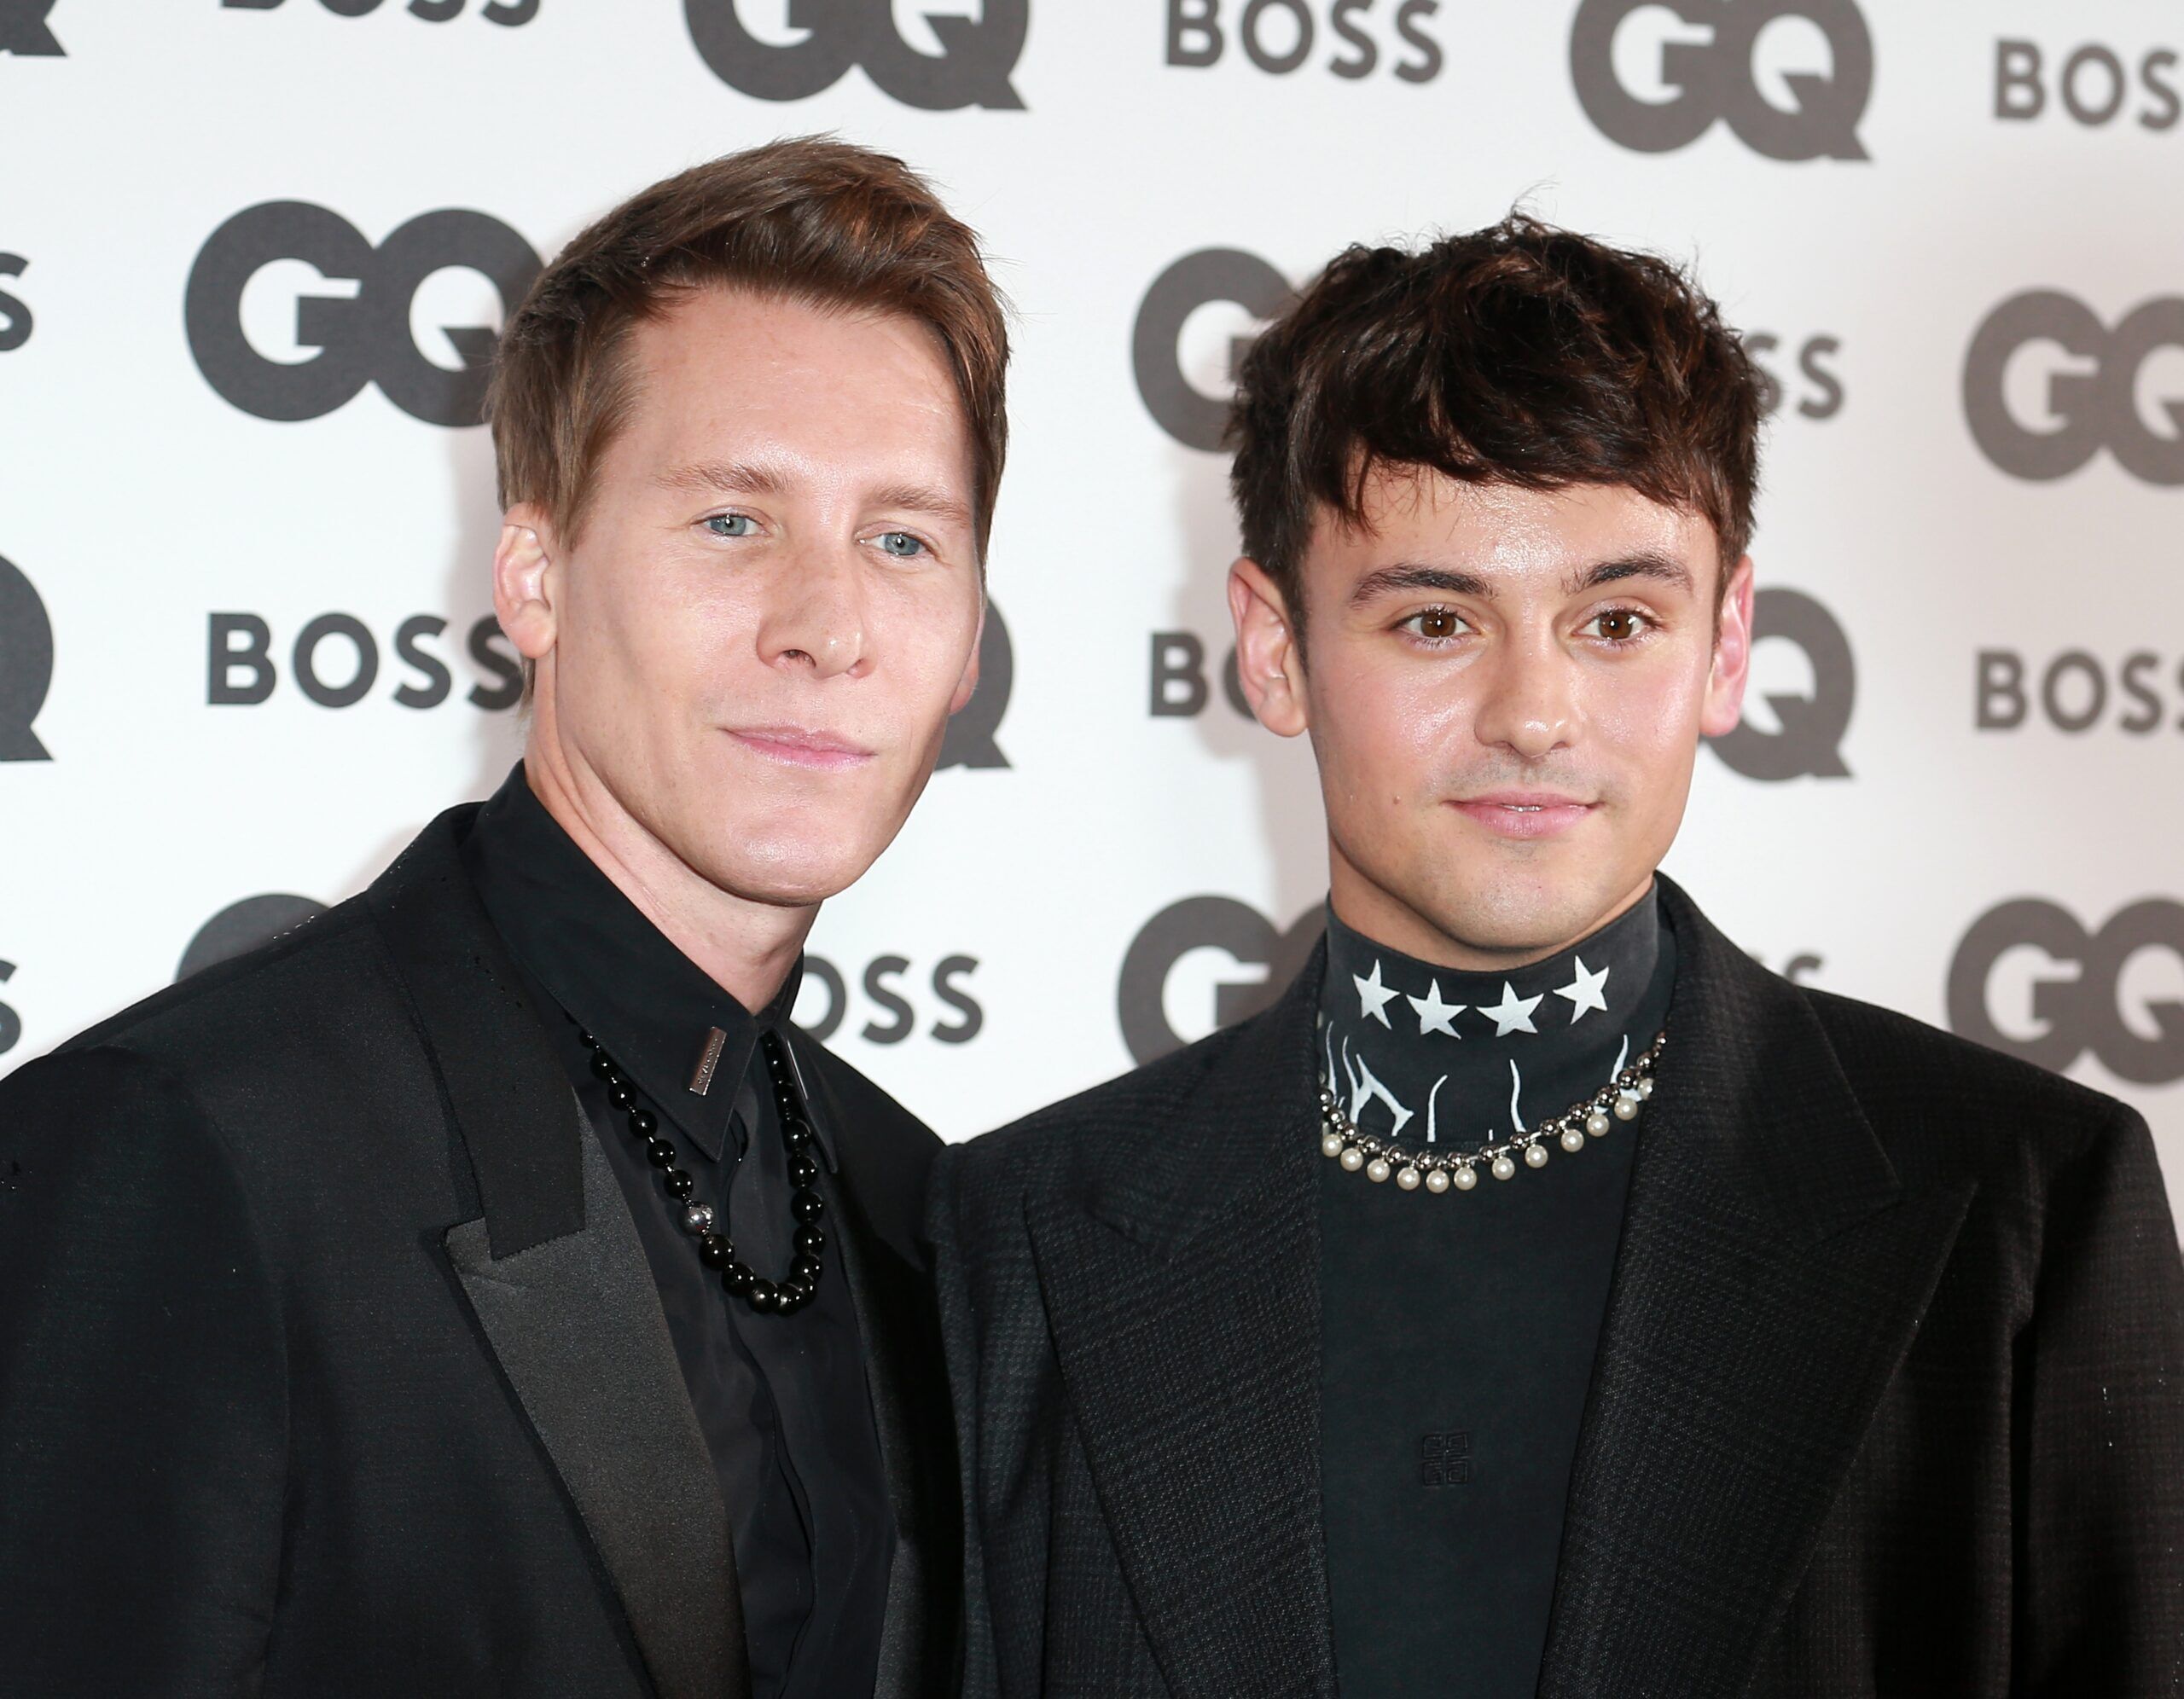 London United Kingdom - November 16, 2022: Tom Daley and Dustin Lance Black attend the GQ Men Of The Year Awards 2022 at The Mandarin Oriental Hyde Park in London, England.